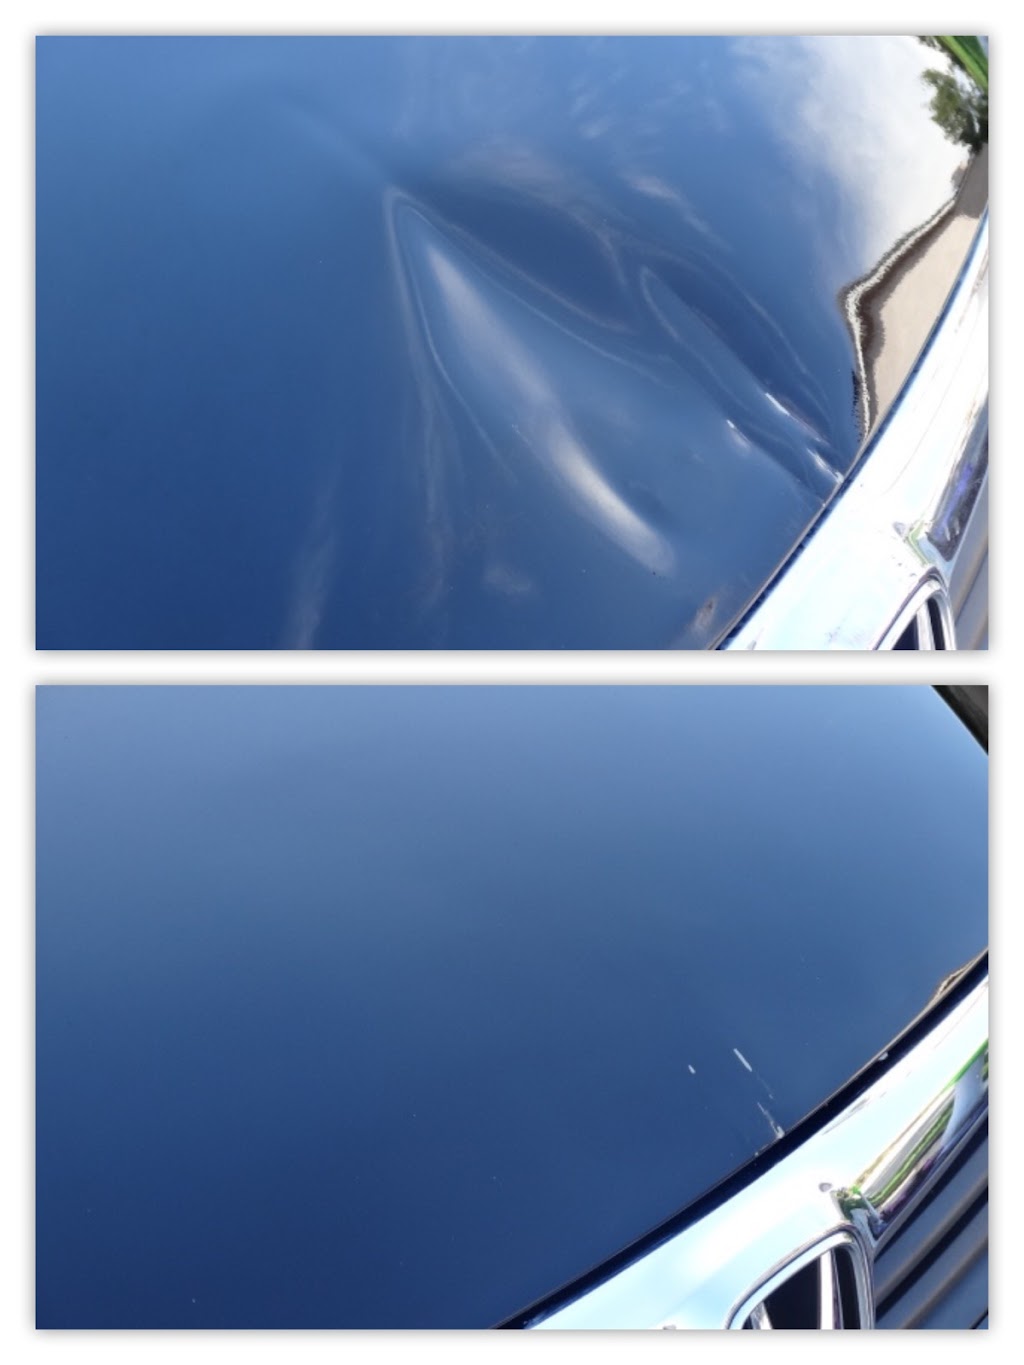 DentFree Paintless Dent Removal | San Leandro, CA 94579 | Phone: (510) 895-5525